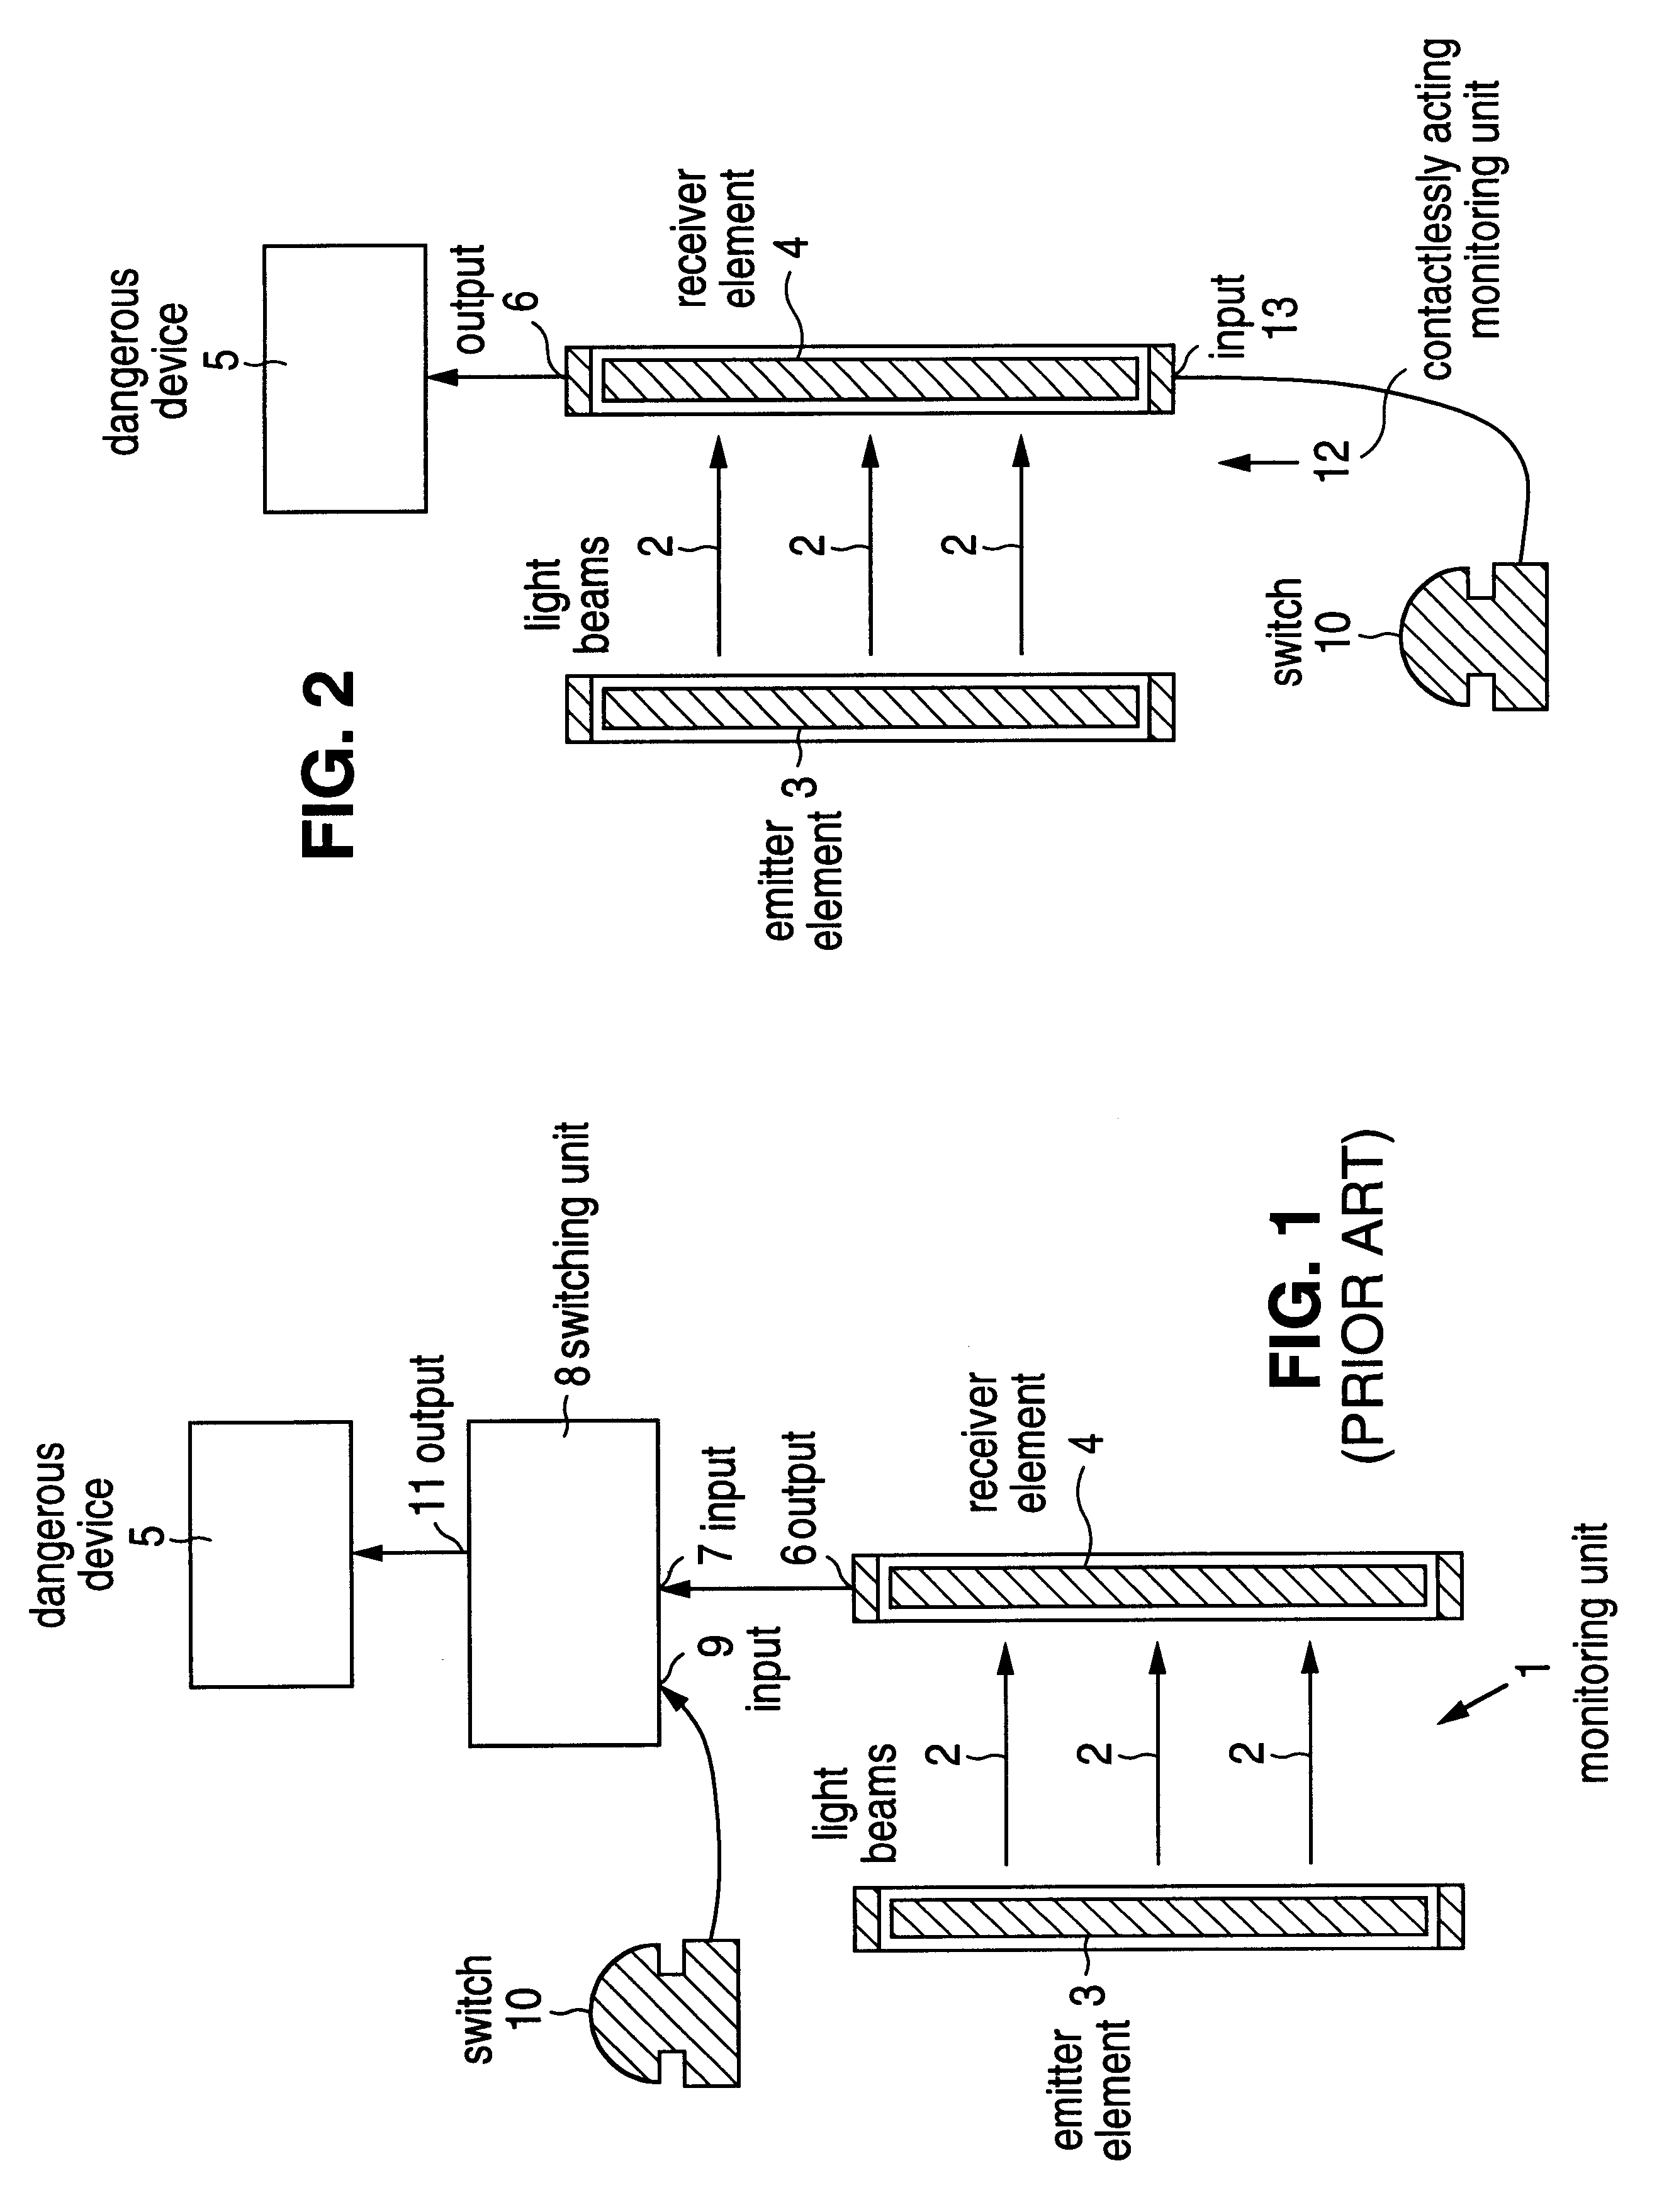 Apparatus for the monitoring of a protection region